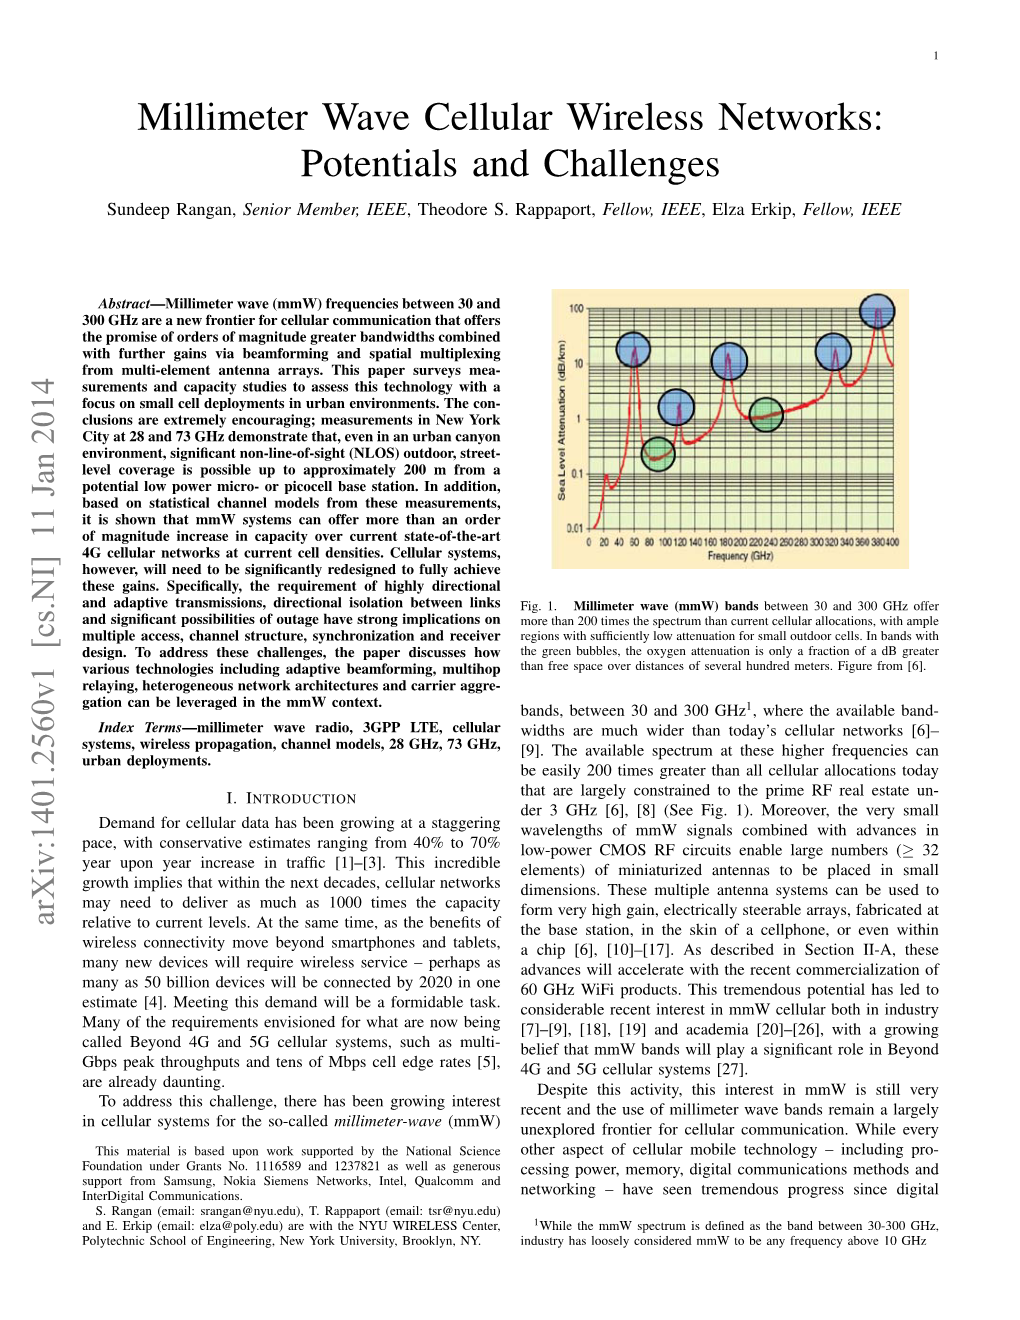 Millimeter Wave Cellular Wireless Networks: Potentials and Challenges Sundeep Rangan, Senior Member, IEEE, Theodore S